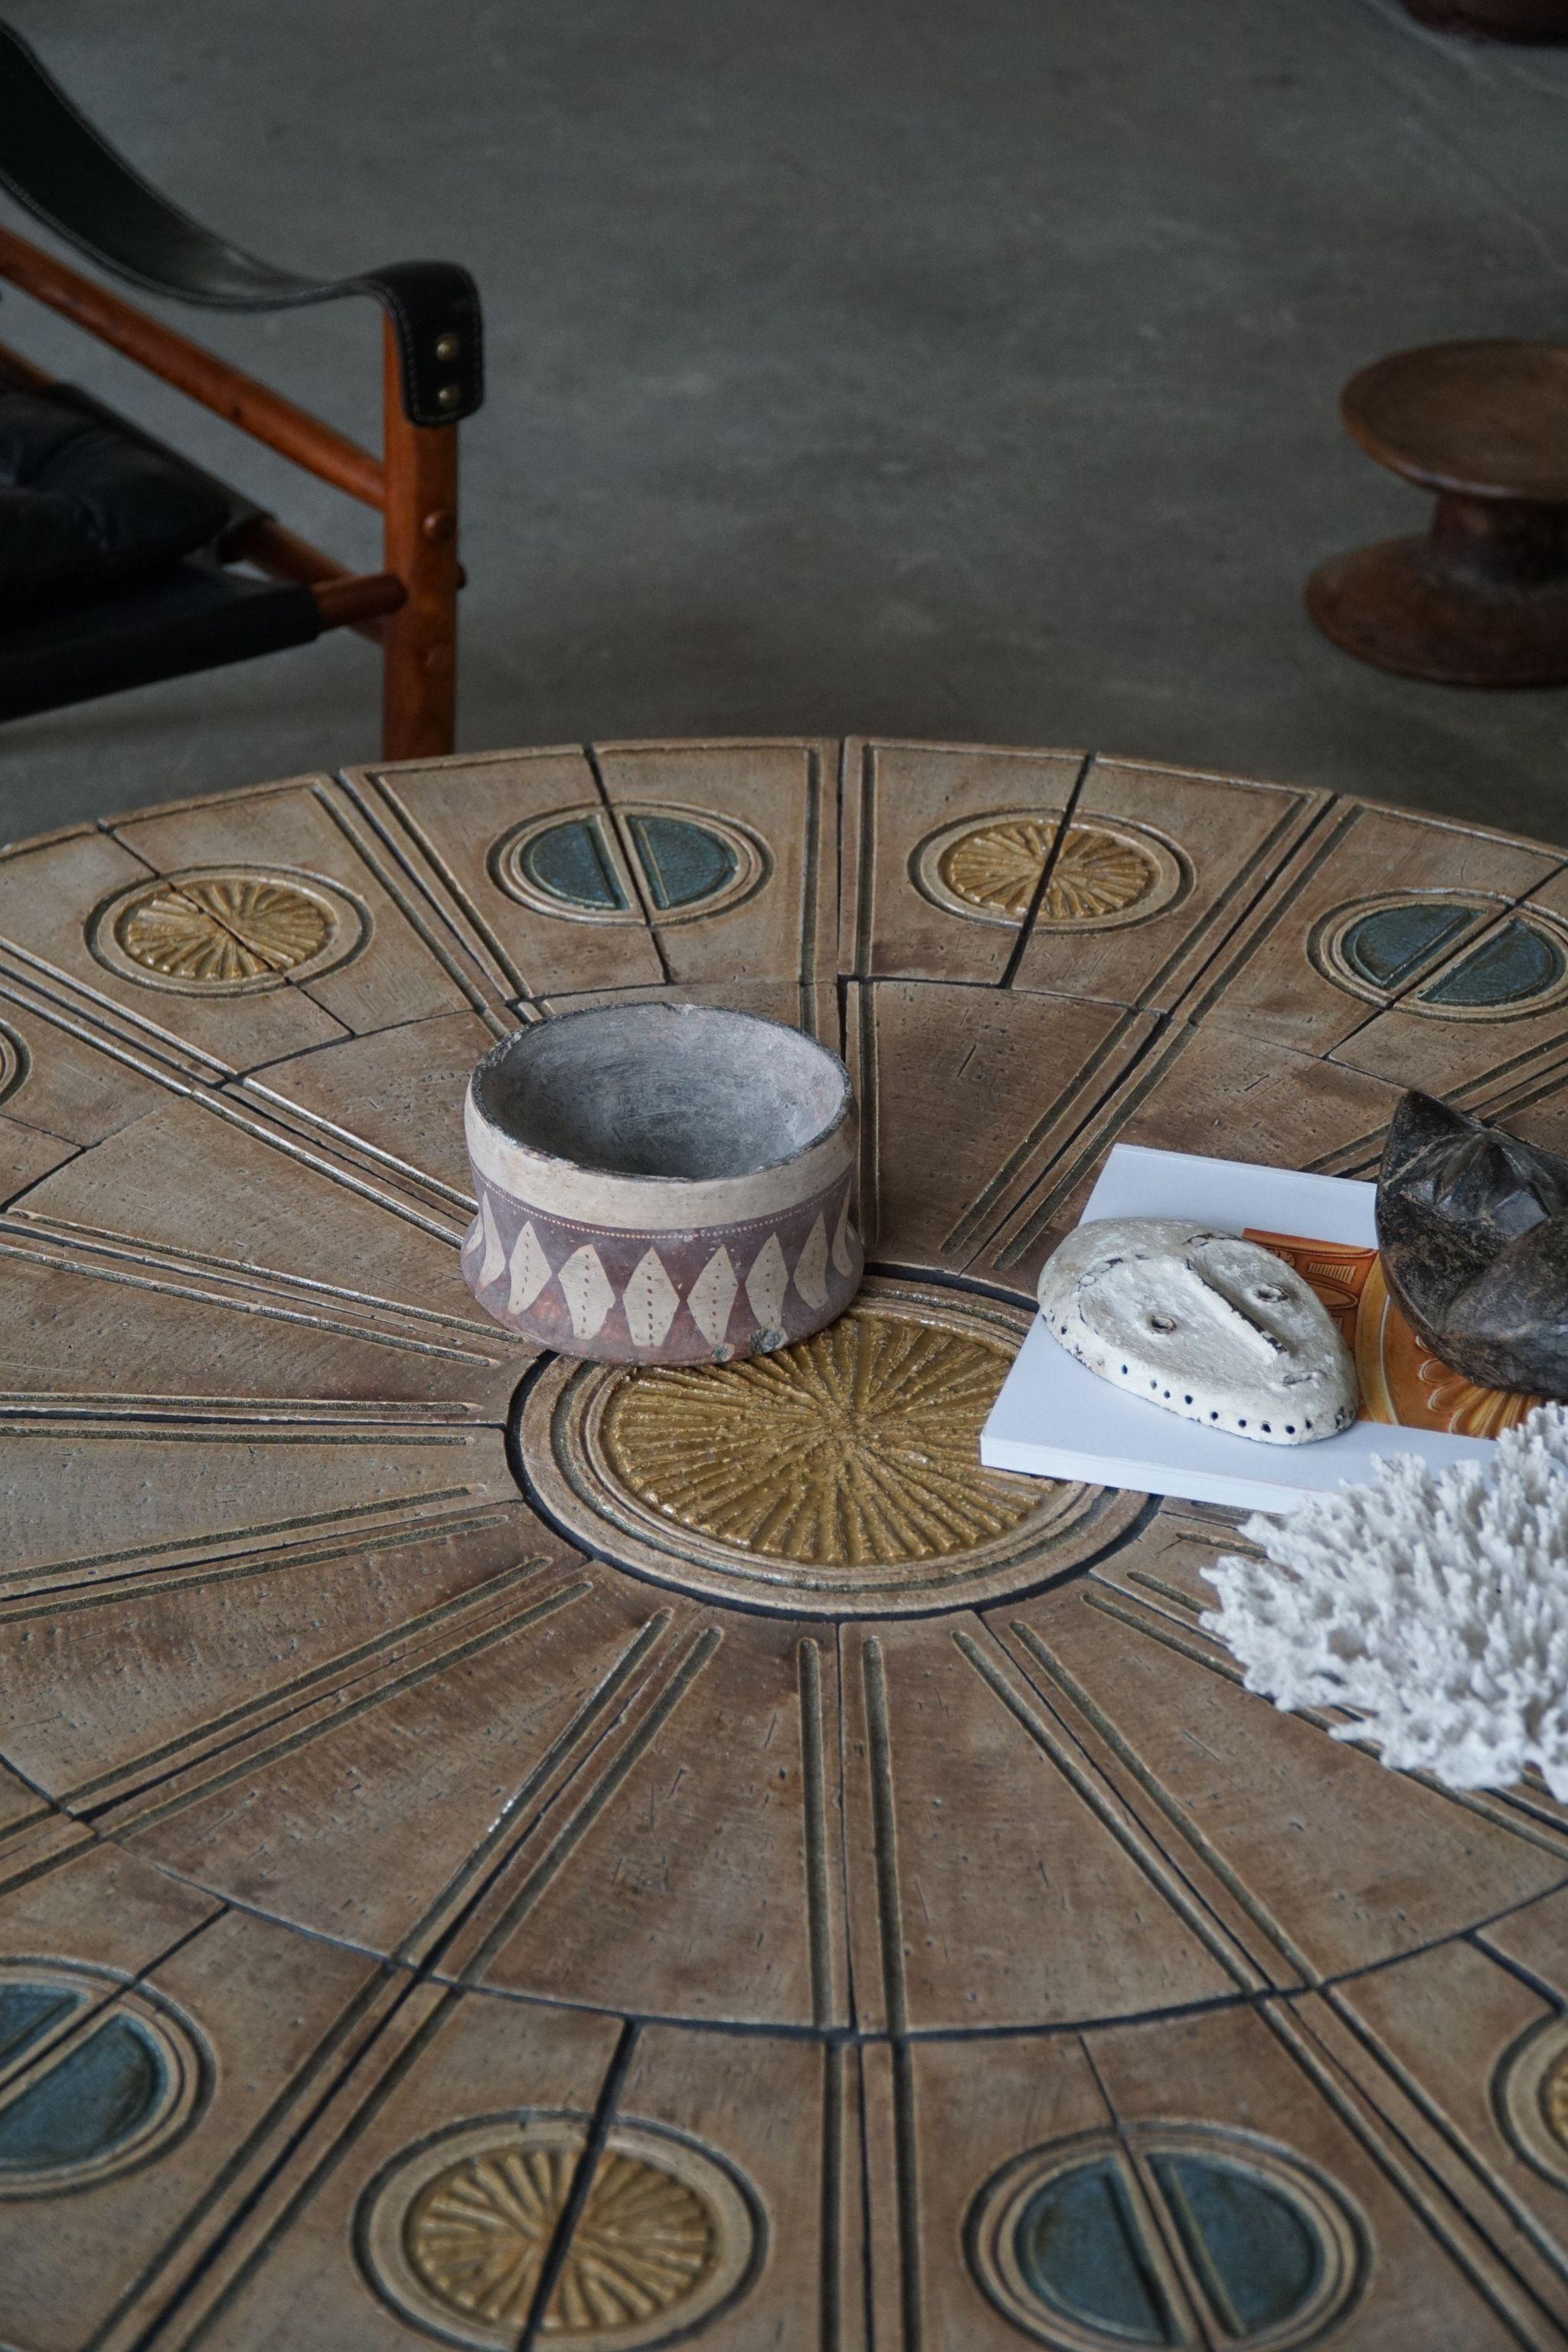 20th Century Round Coffee Table, Wood & Ceramic Tiles, Ox Art by Trioh, Denmark, 1978 For Sale